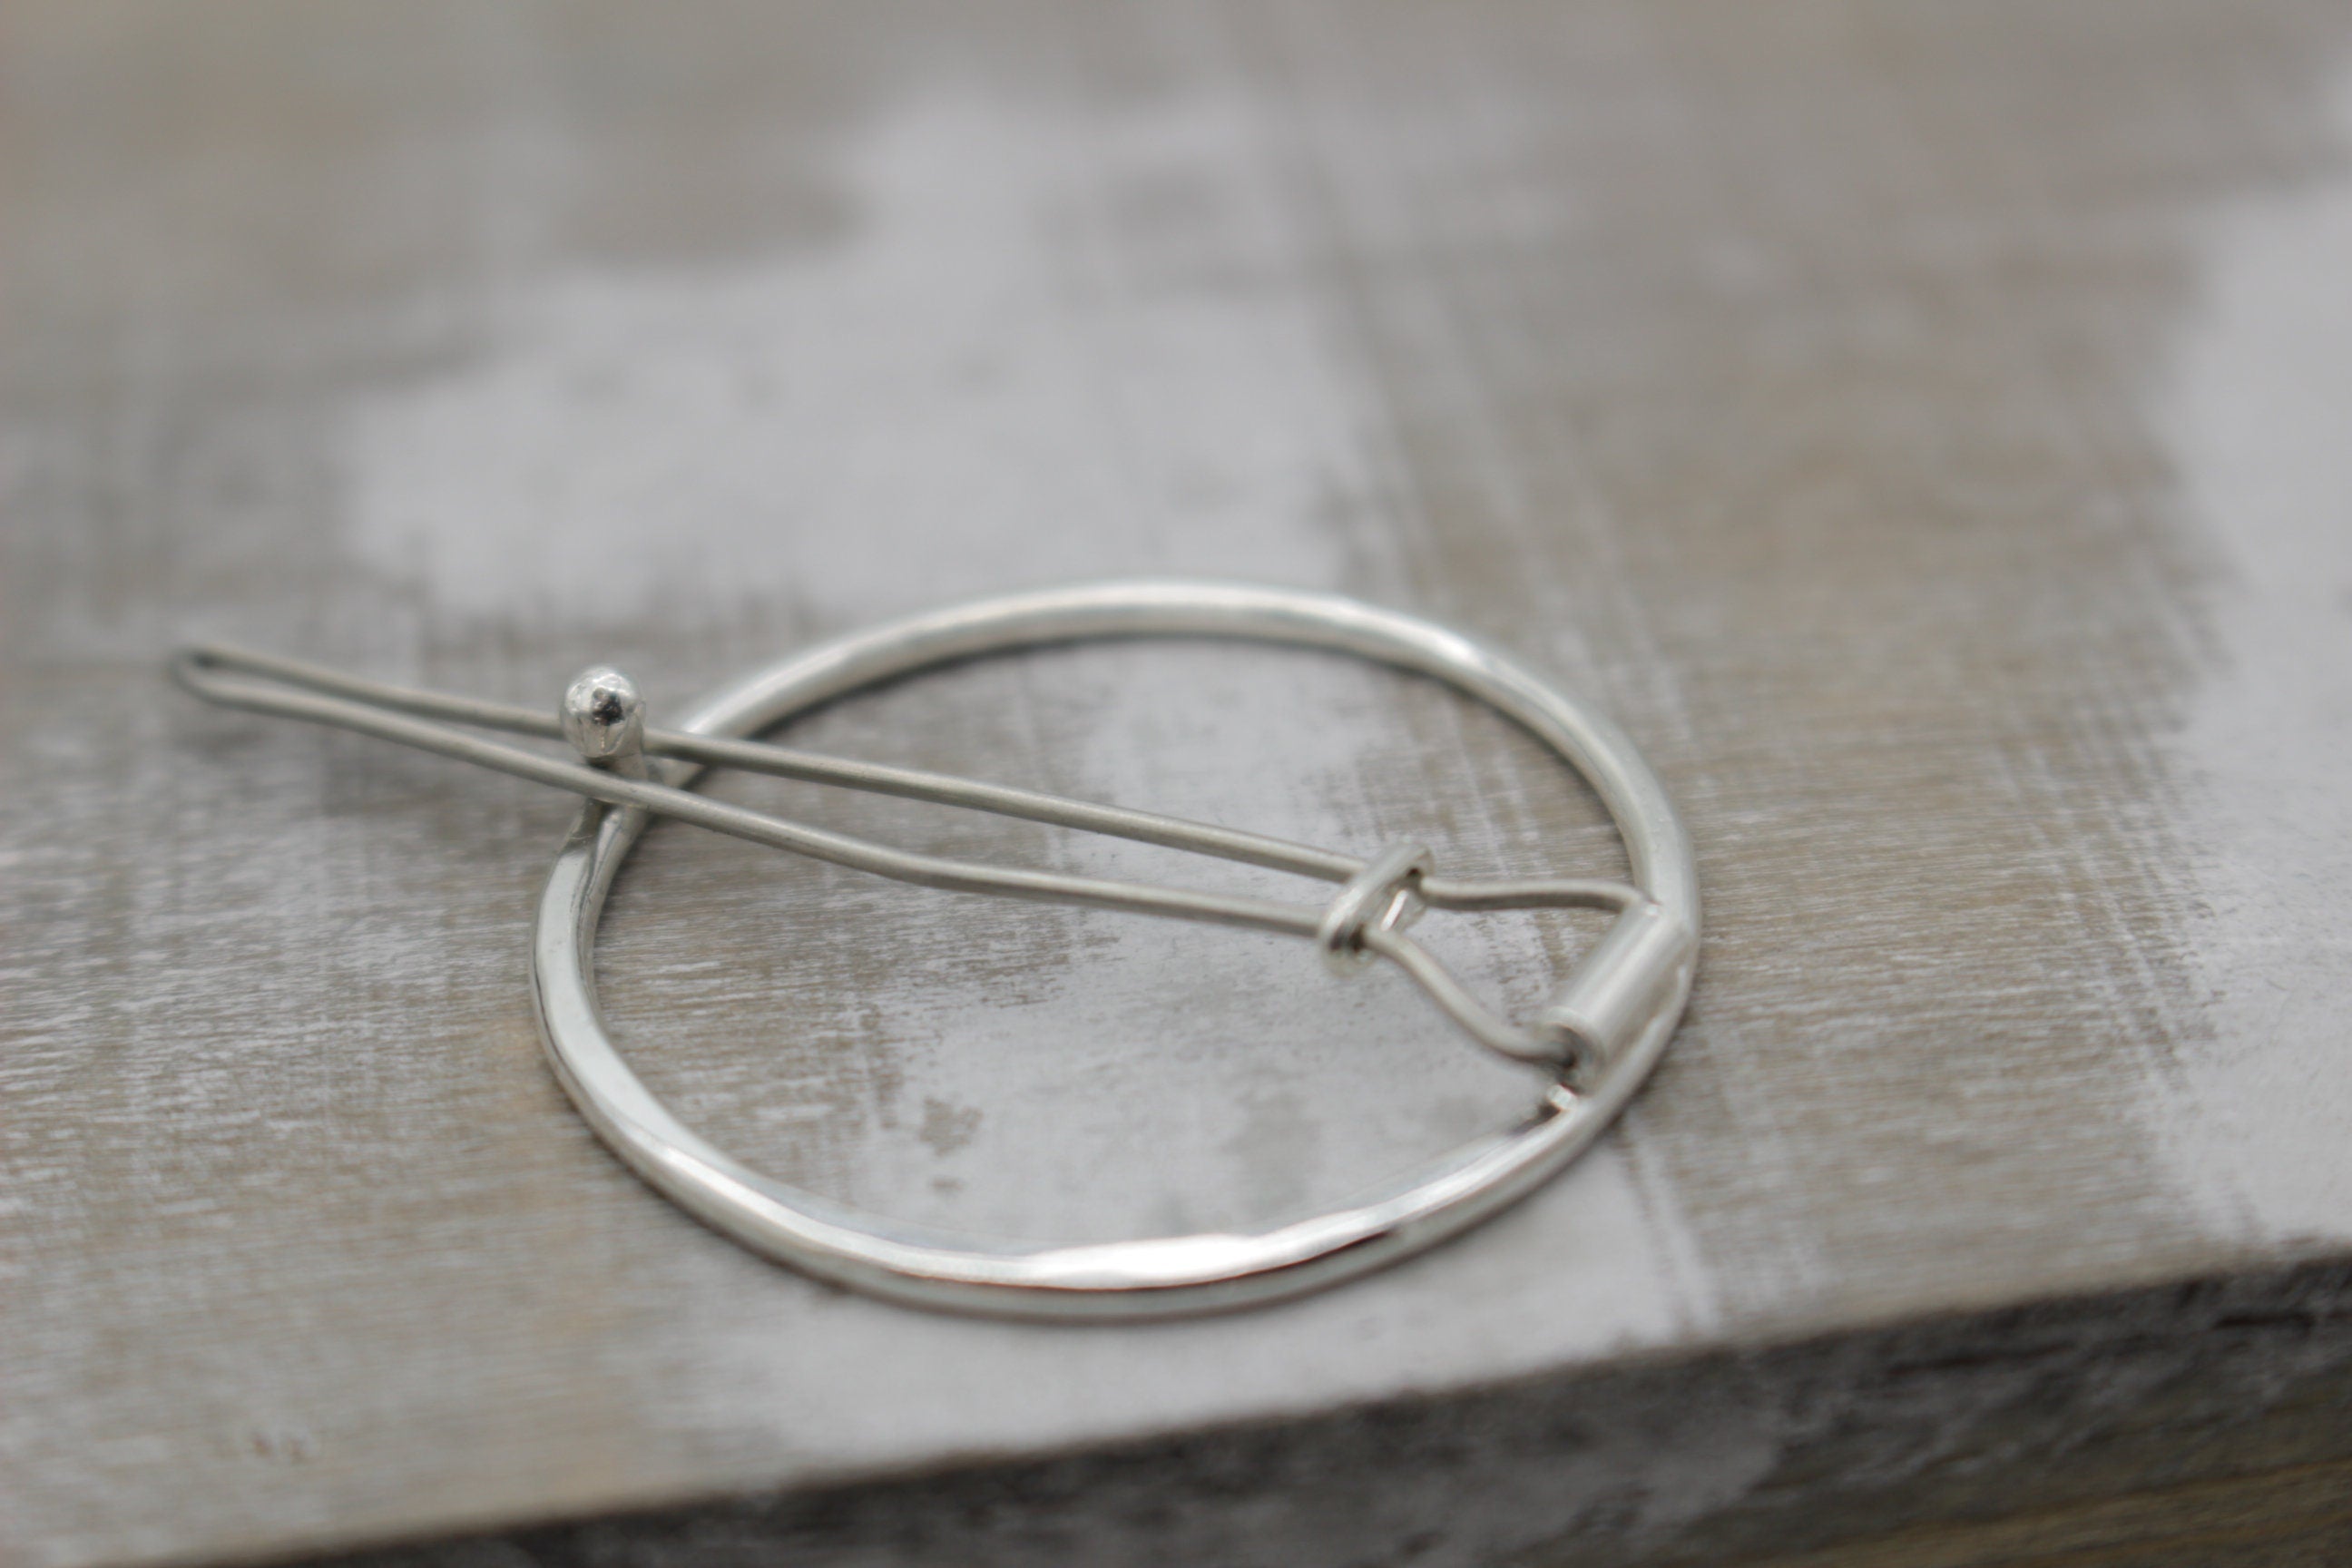 Small Silver hammered barrette - sterling silver barrette - gift for her - small barrette - hair jewelry - bangs